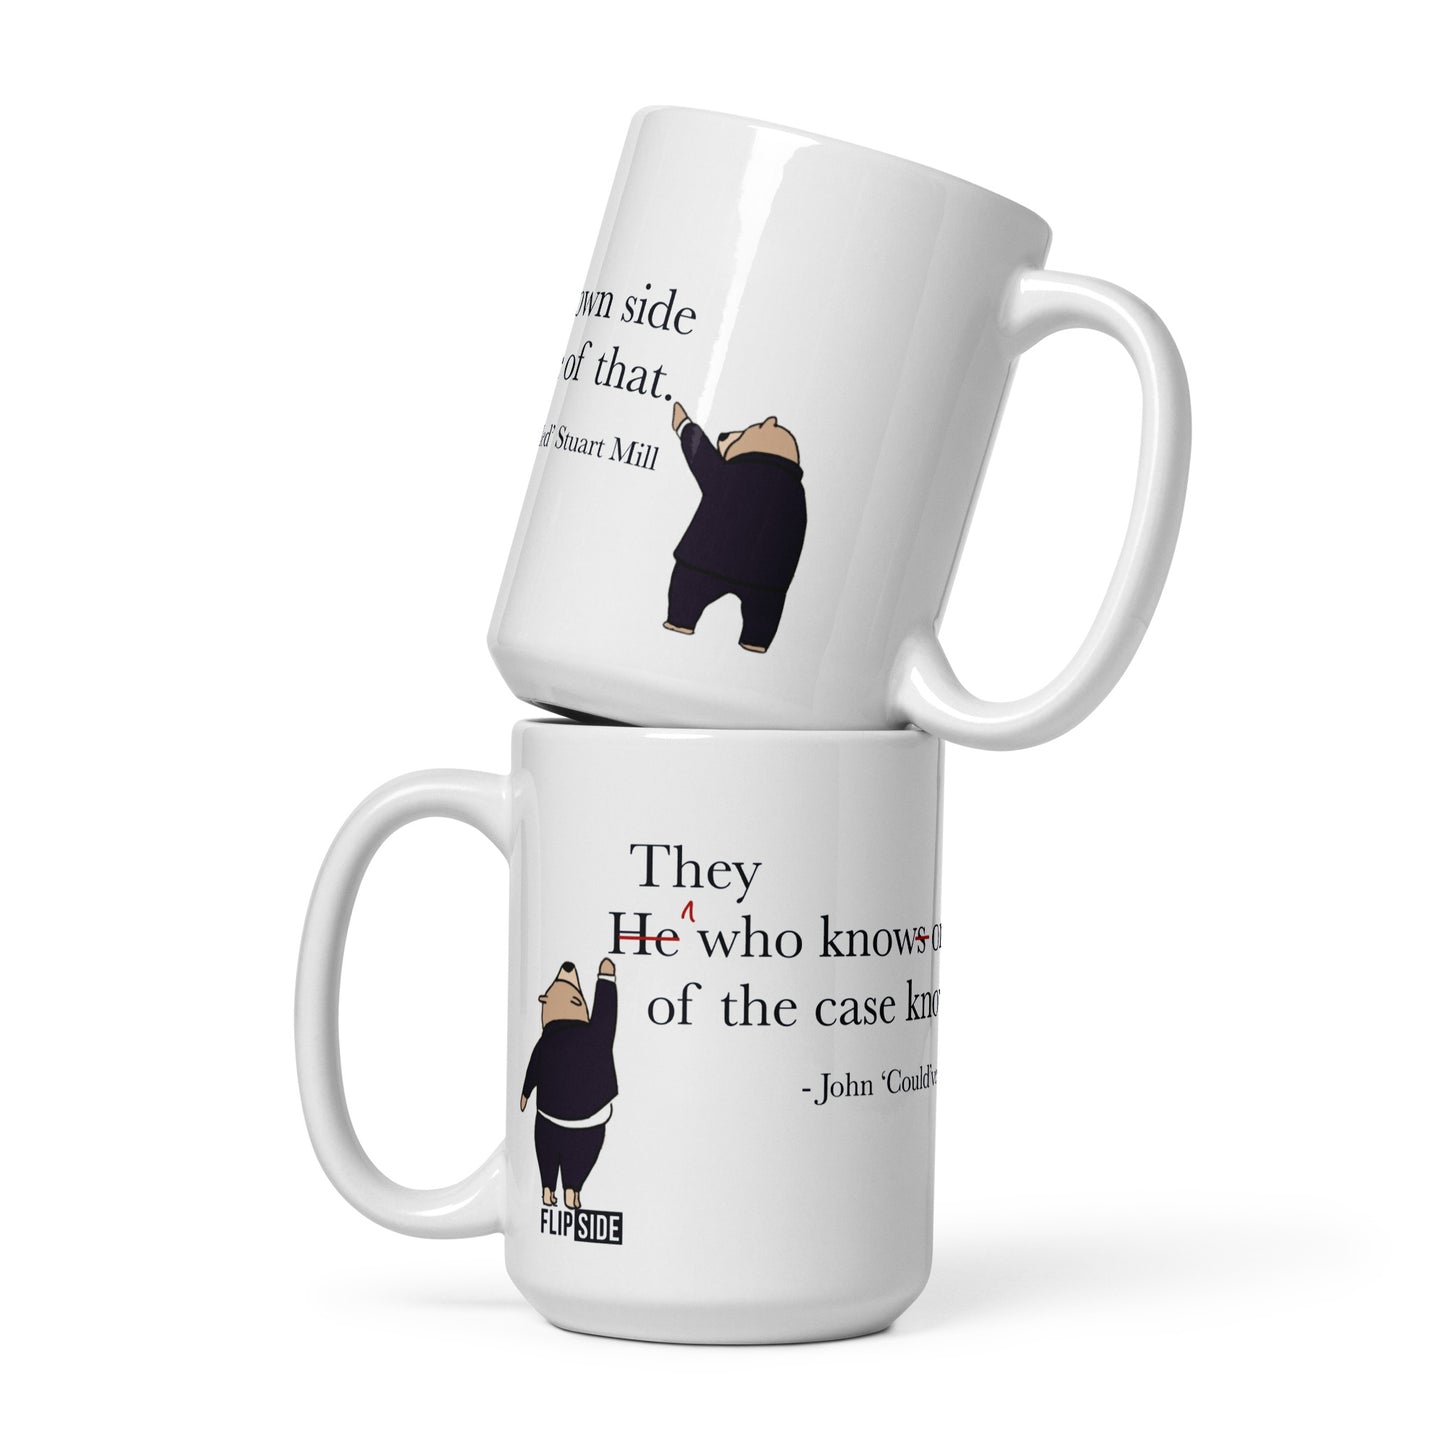 Quotes Series: John 'Could've Been Cancelled' Stuart Mill Mug